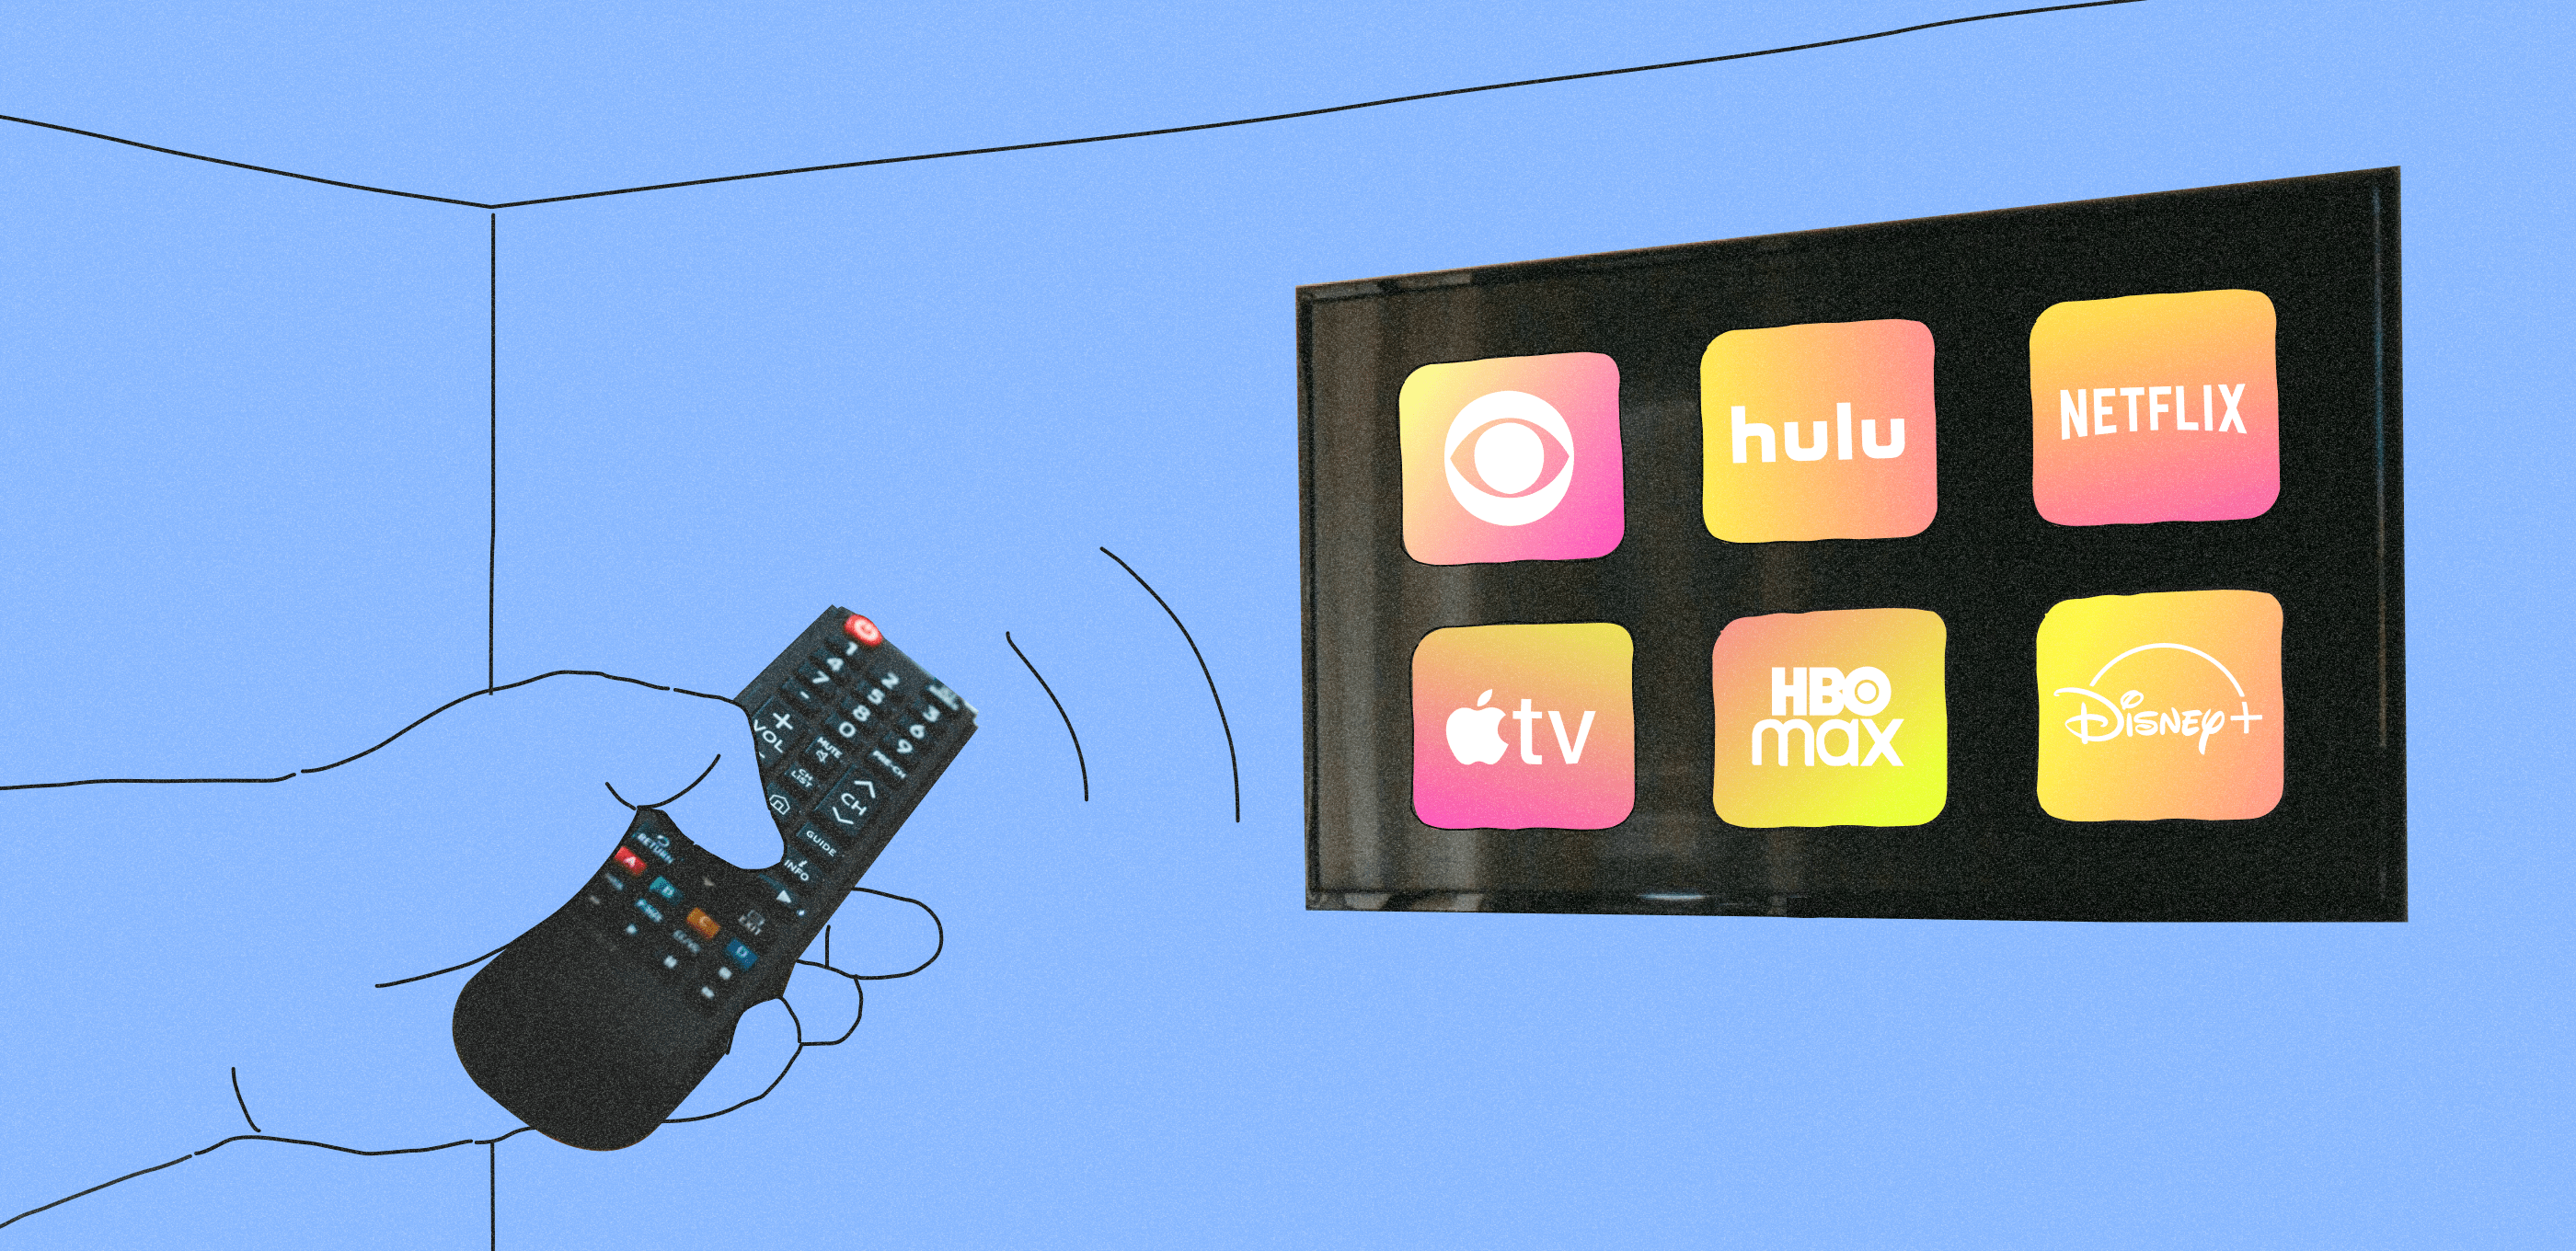 TV with different OTT applications on the screen